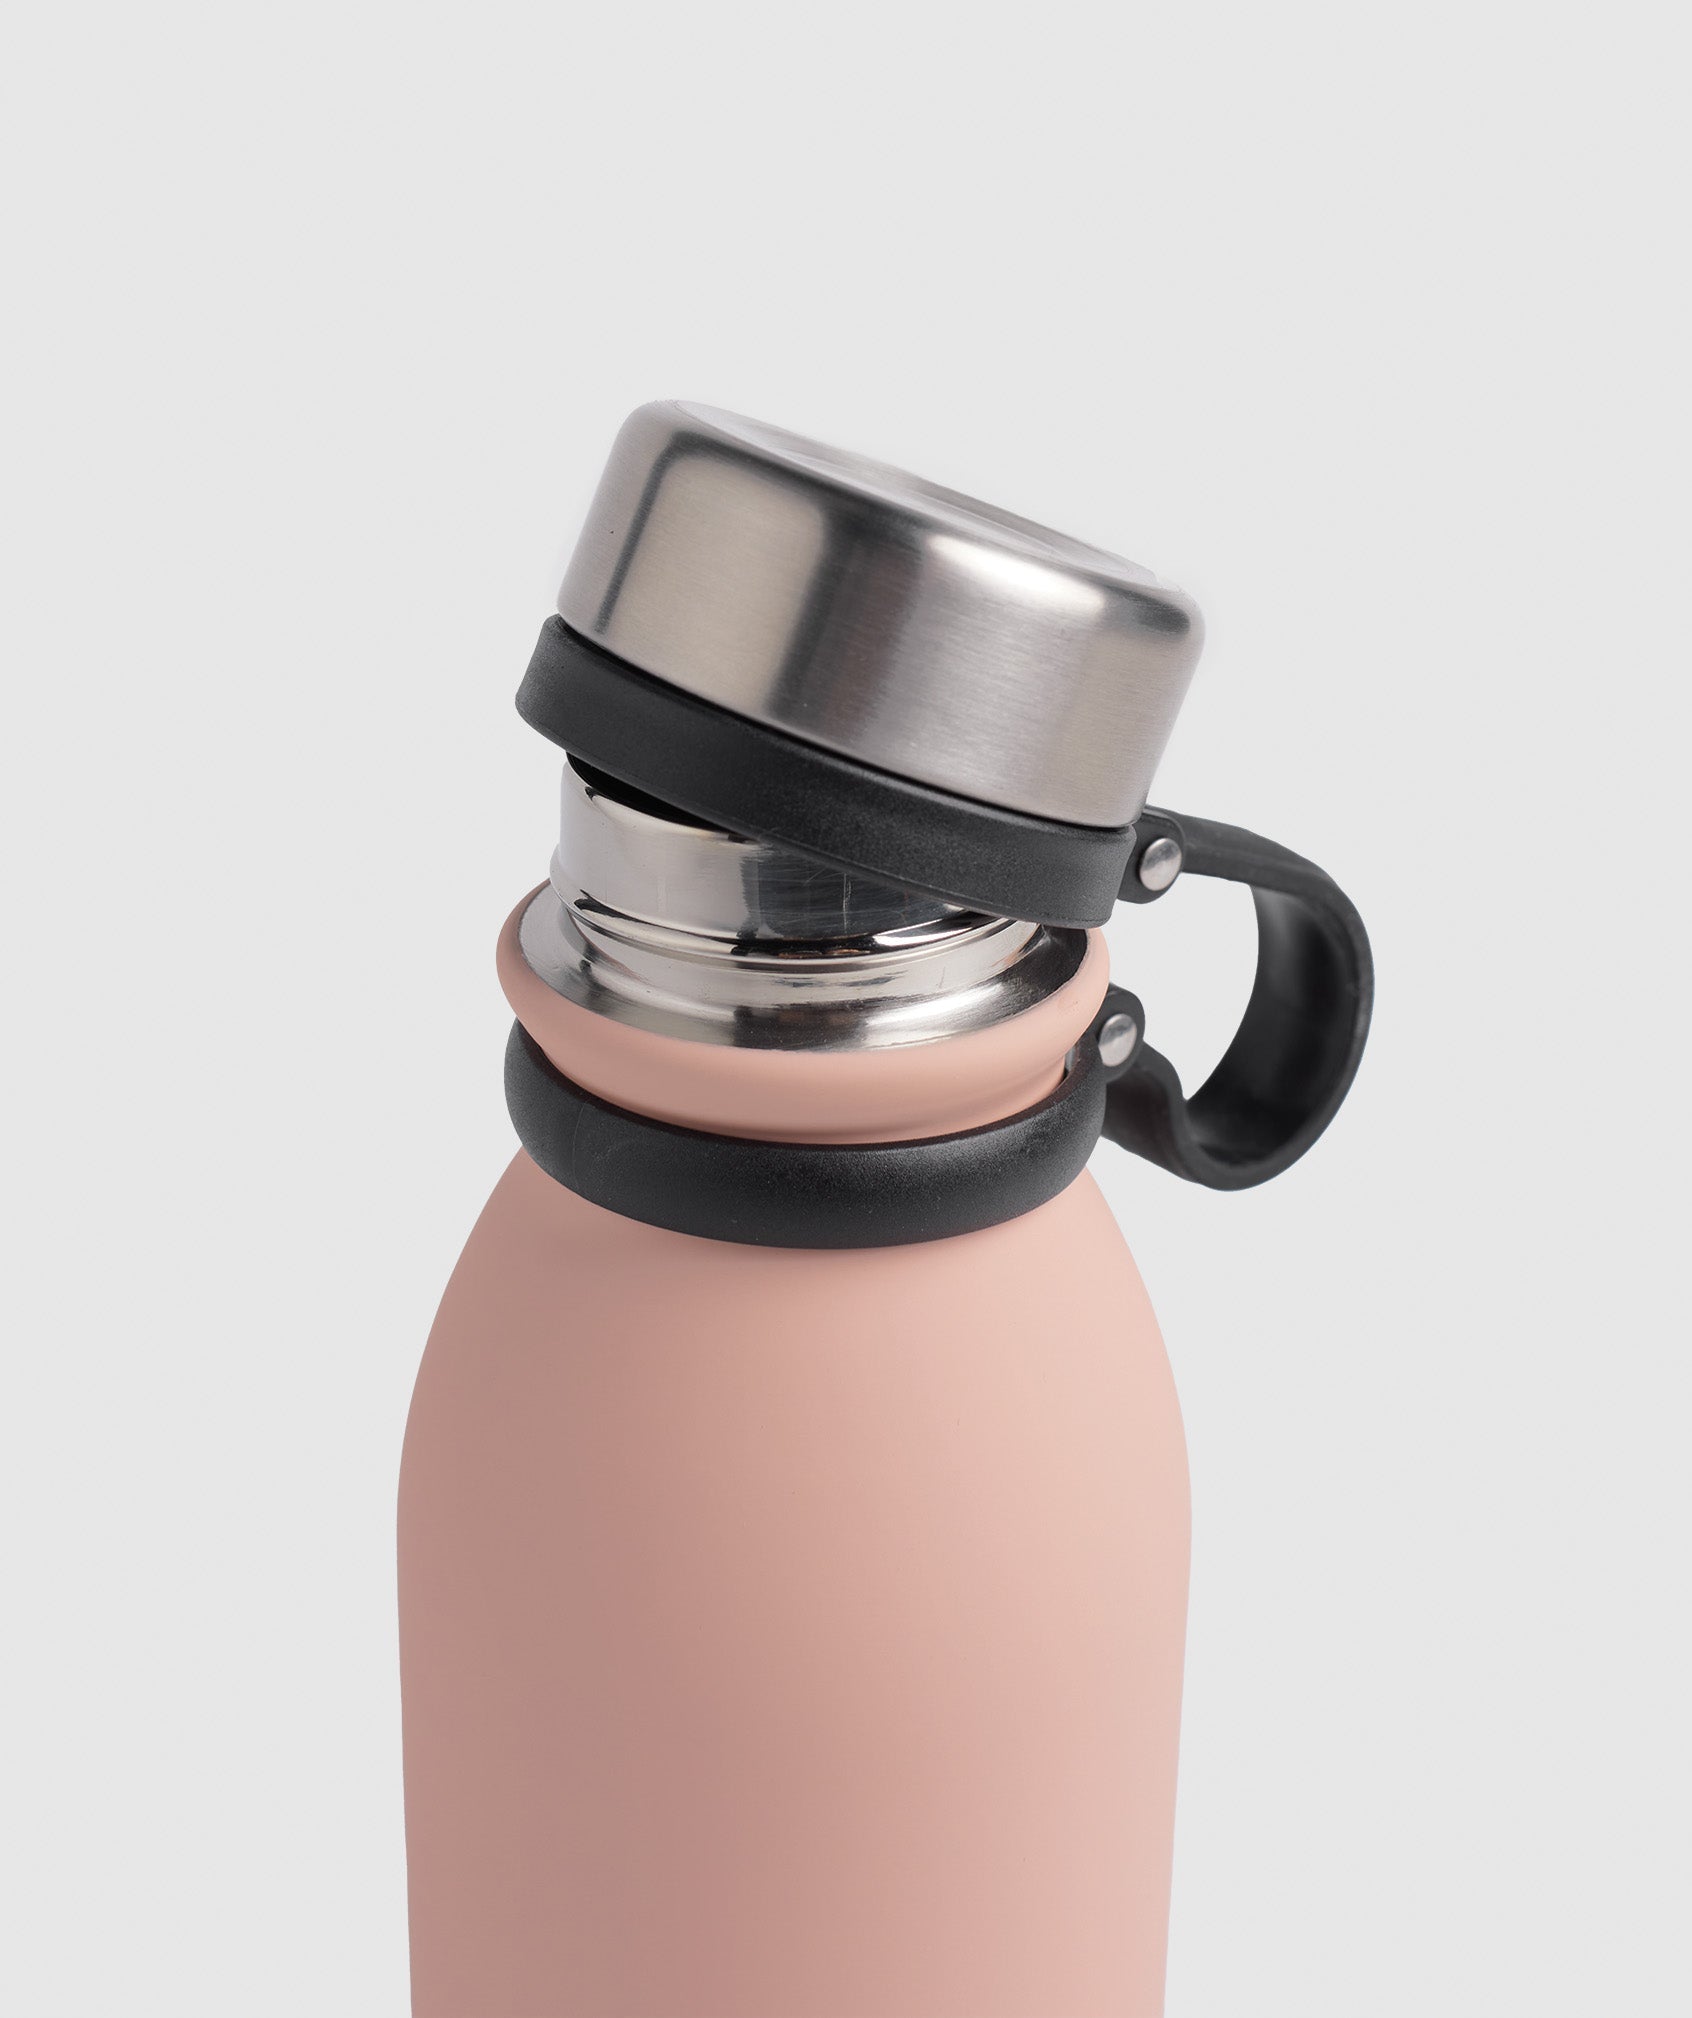 Hot/Cold Bottle in Hazy Pink - view 4